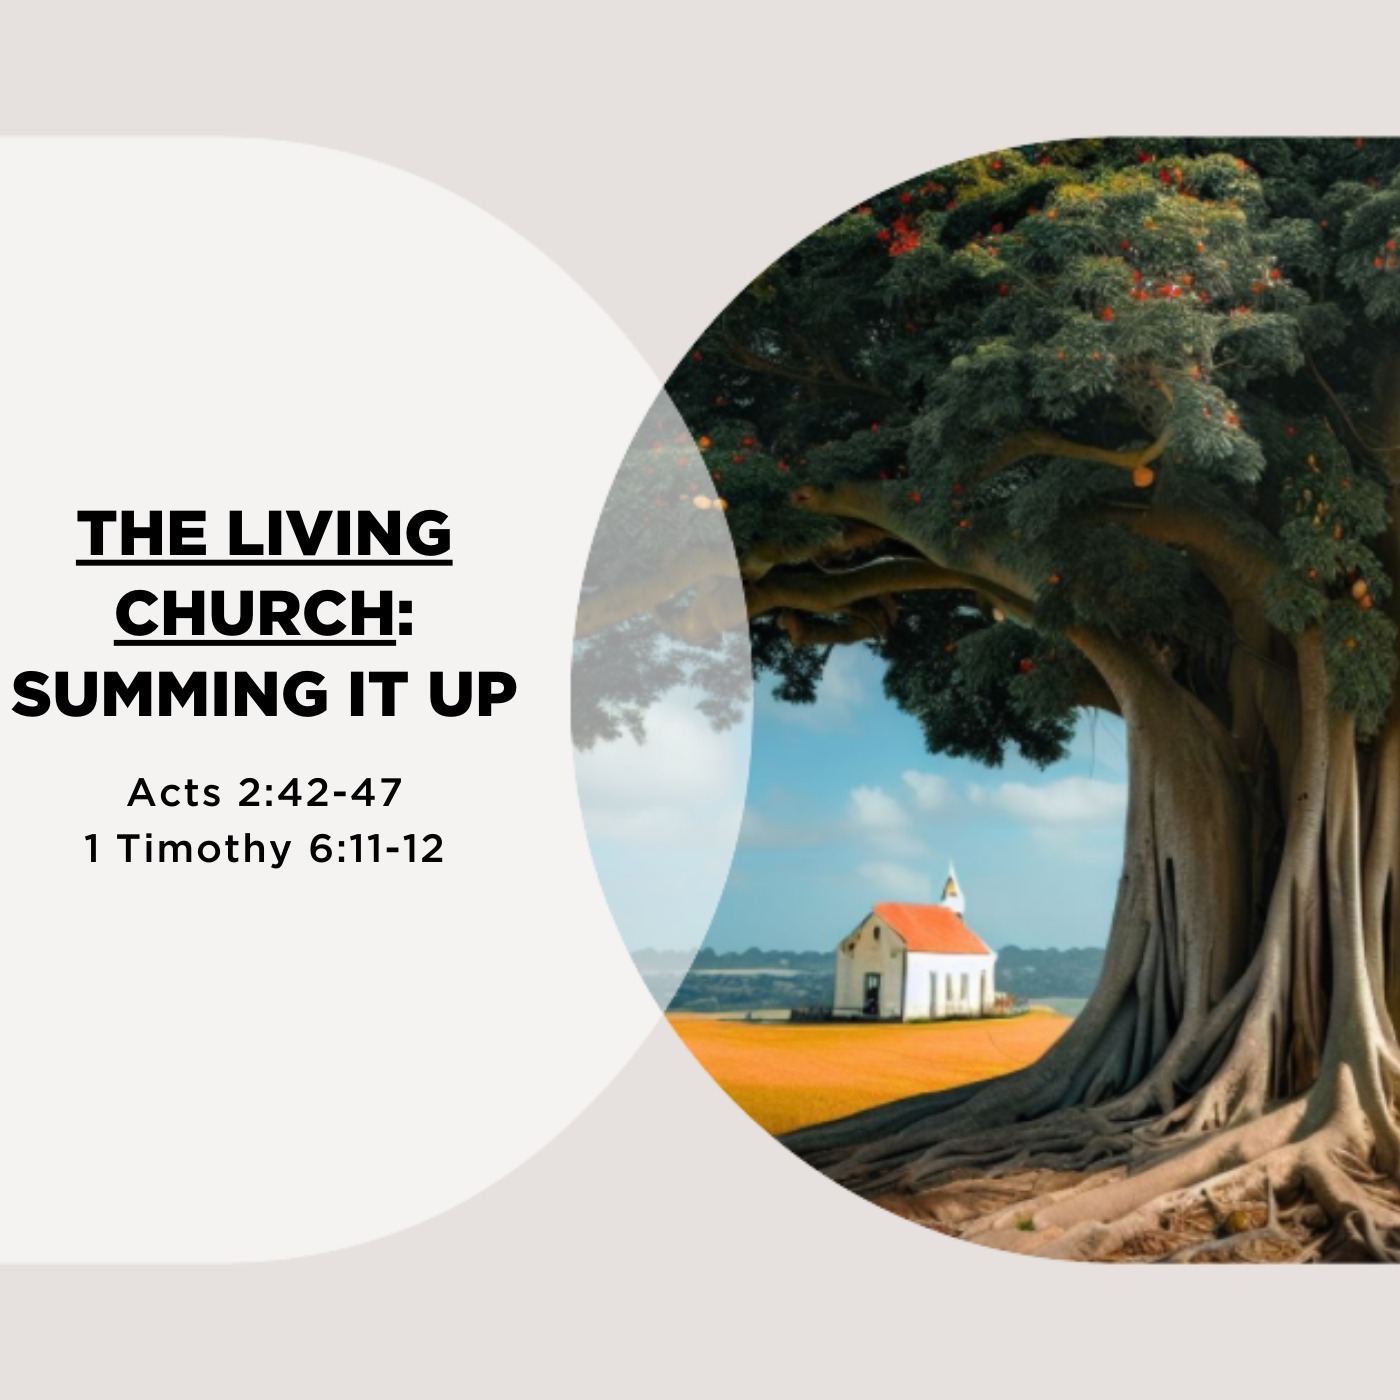 The Living Church: Summing It Up